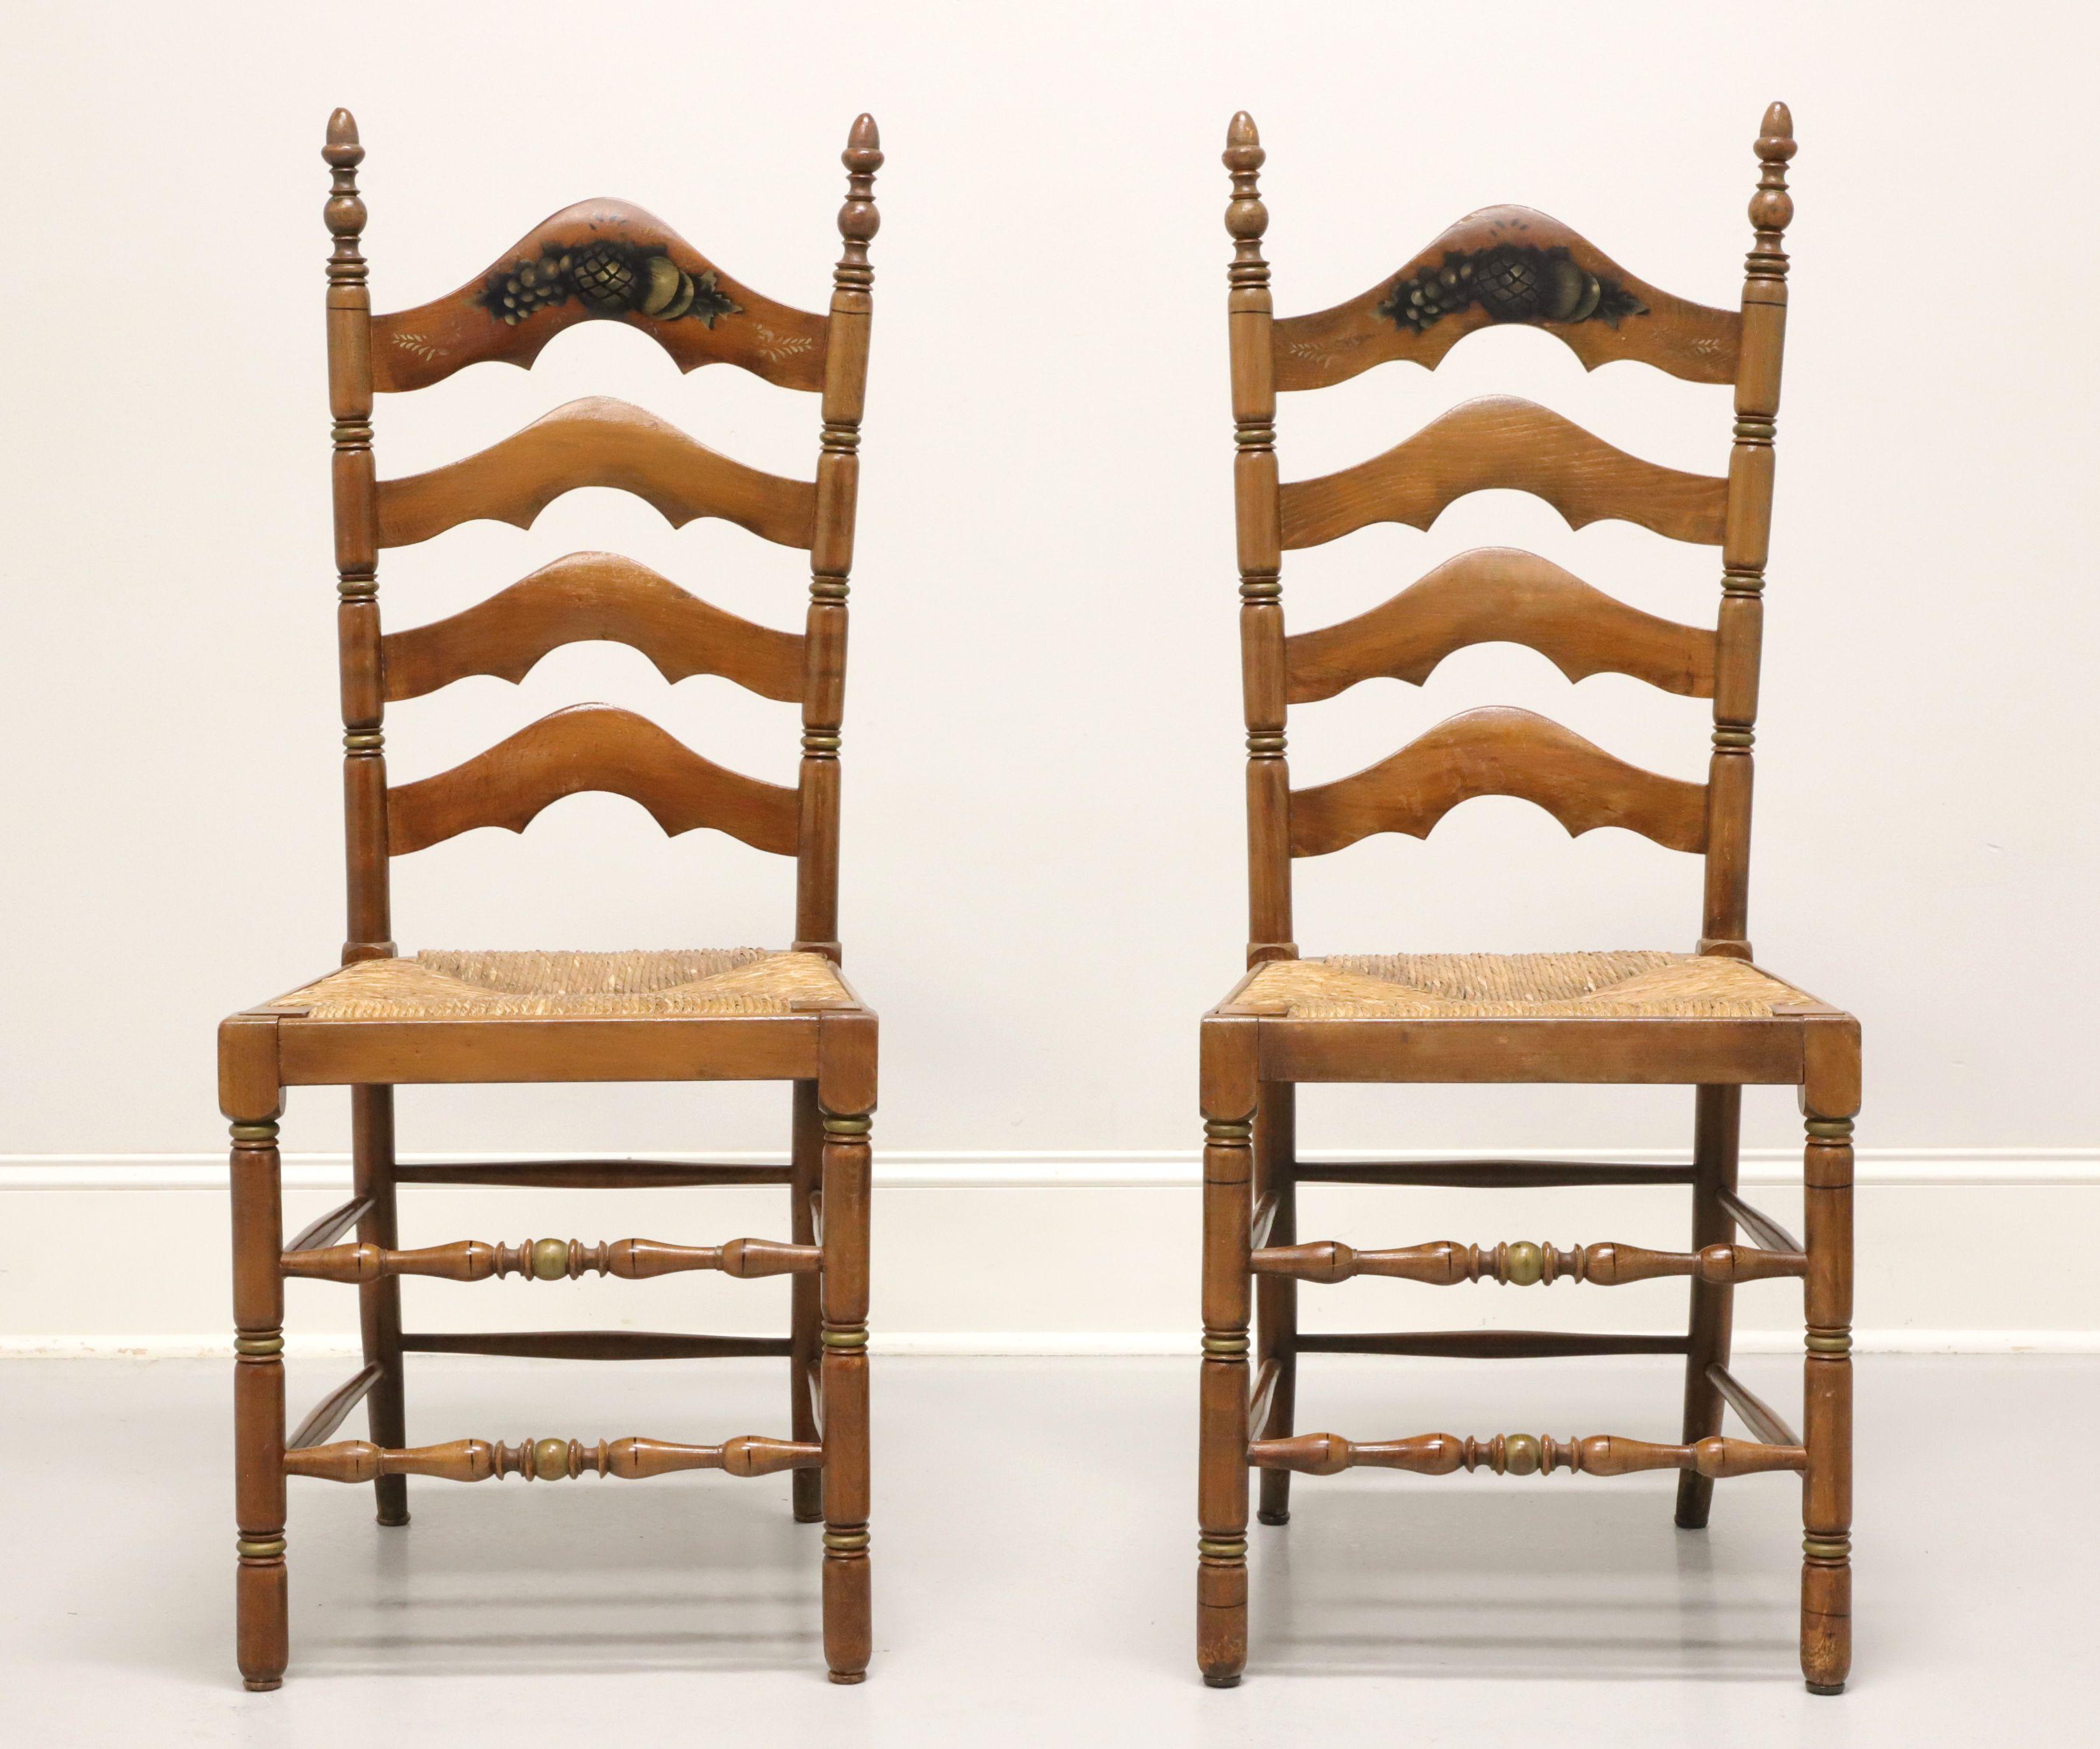 Rustic CAPE ANN CHAIRS Maple Ladder Back Dining Side Chairs with Rush Seats - Pair A For Sale